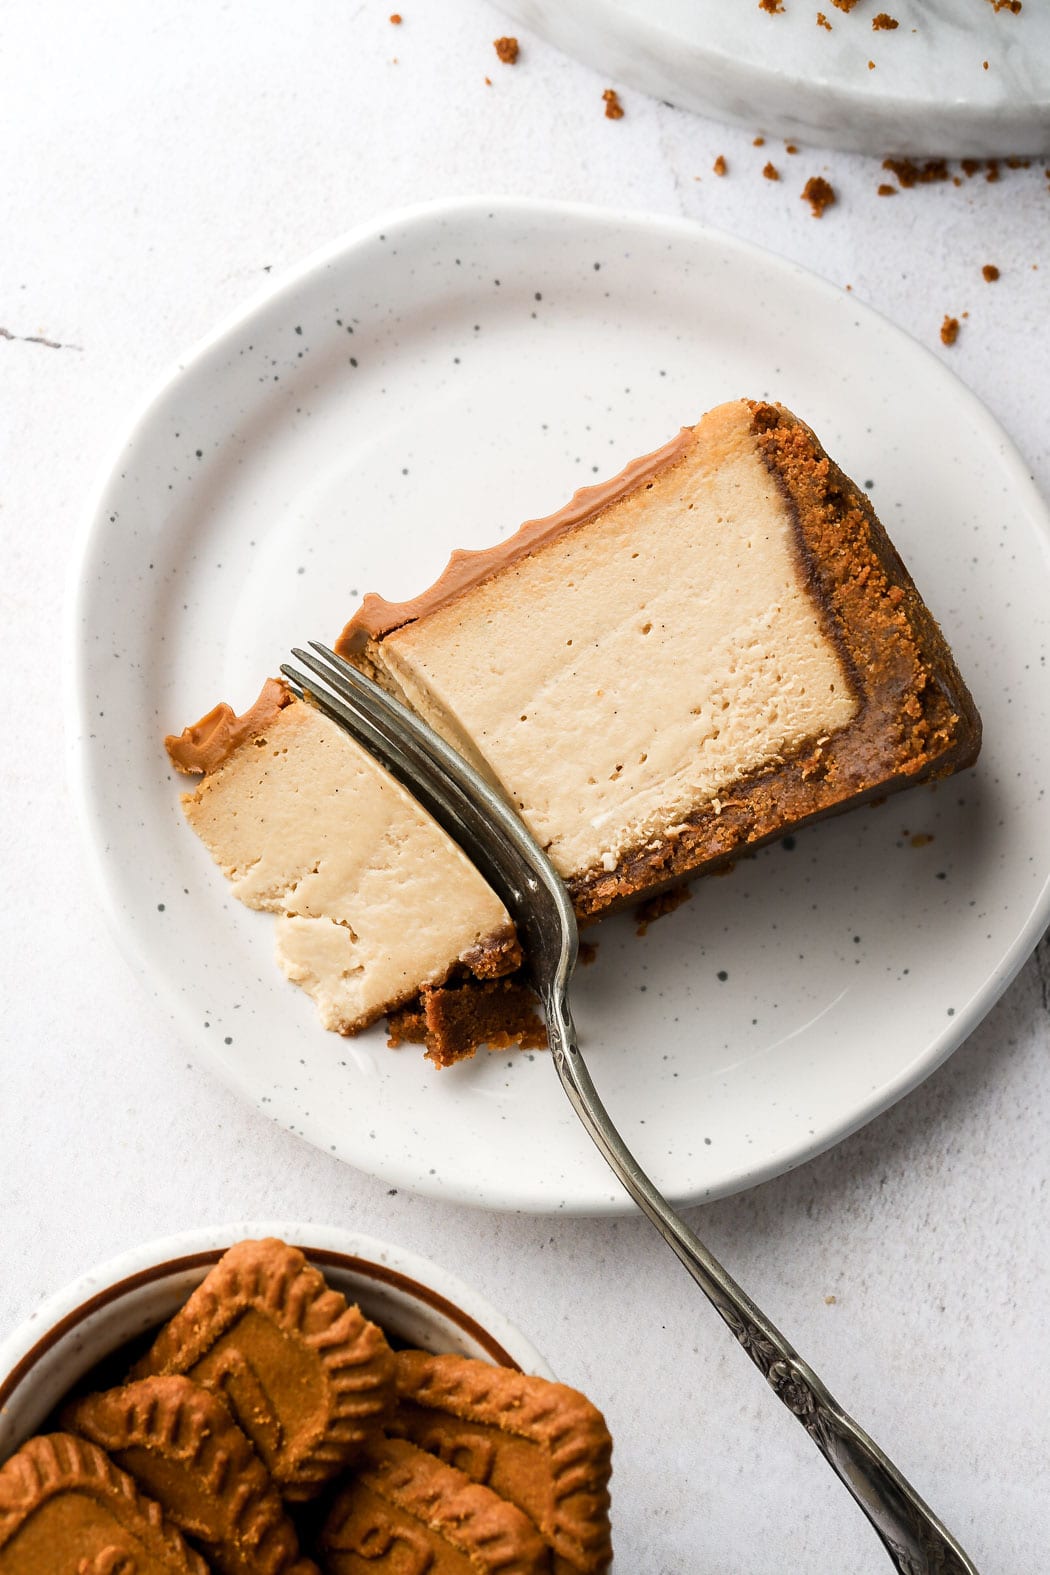 slice of biscoff cheesecake on its side on a plate